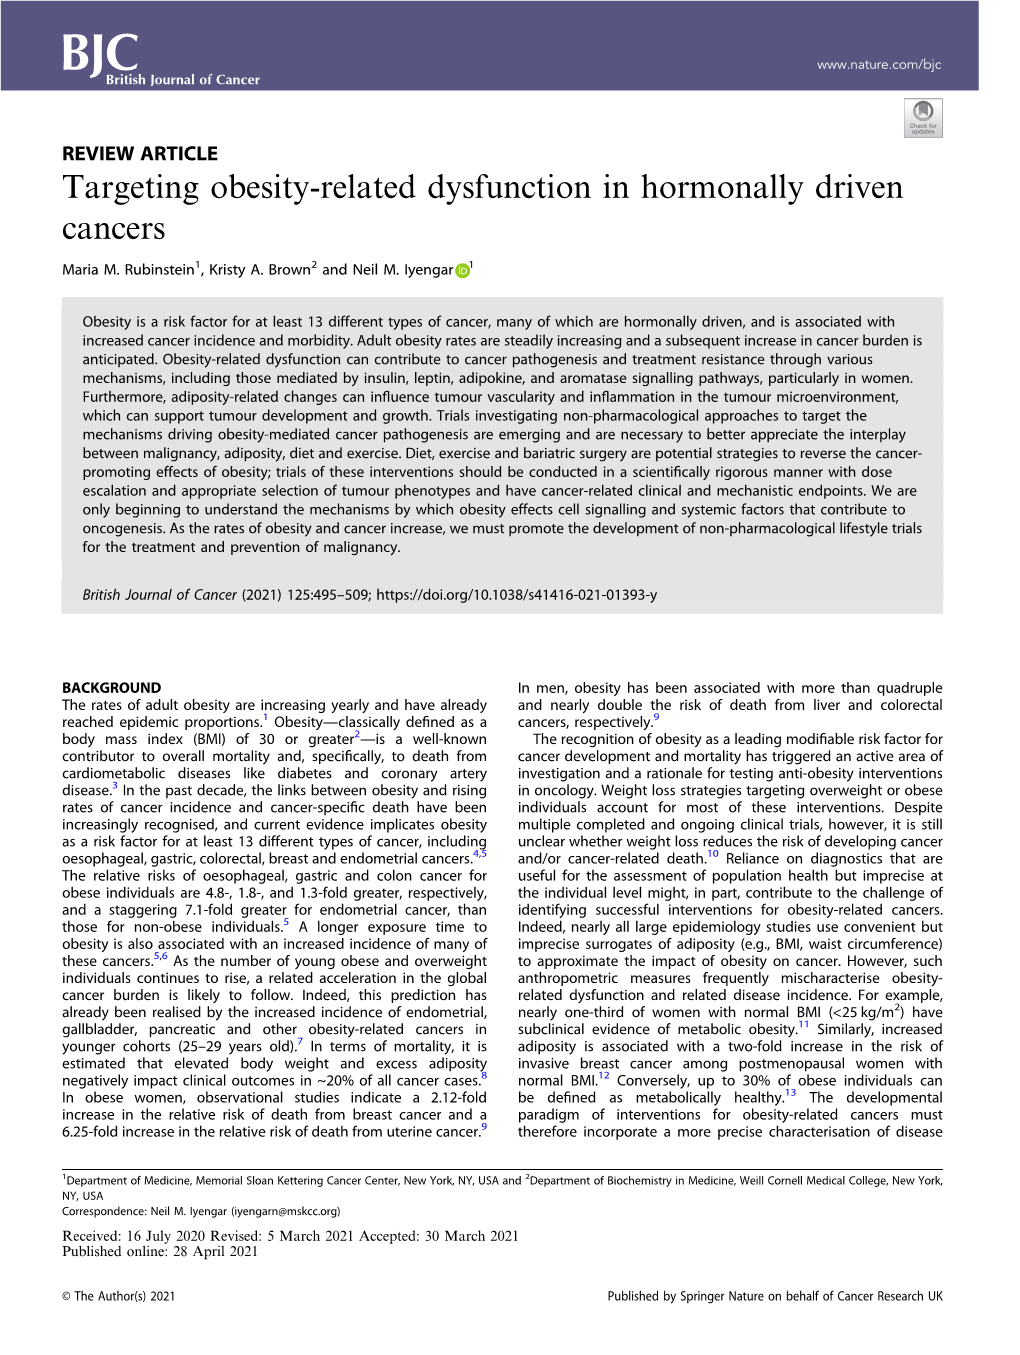 Targeting Obesity-Related Dysfunction in Hormonally Driven Cancers